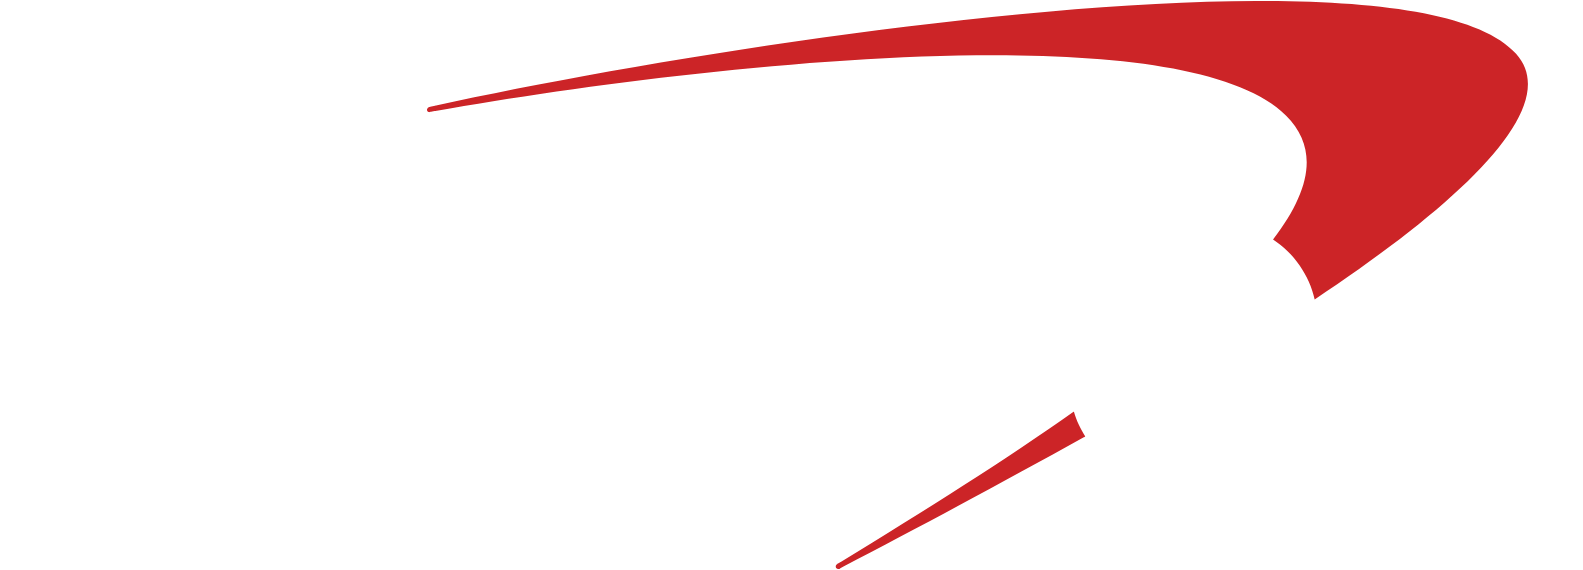 Capital One logo large for dark backgrounds (transparent PNG)